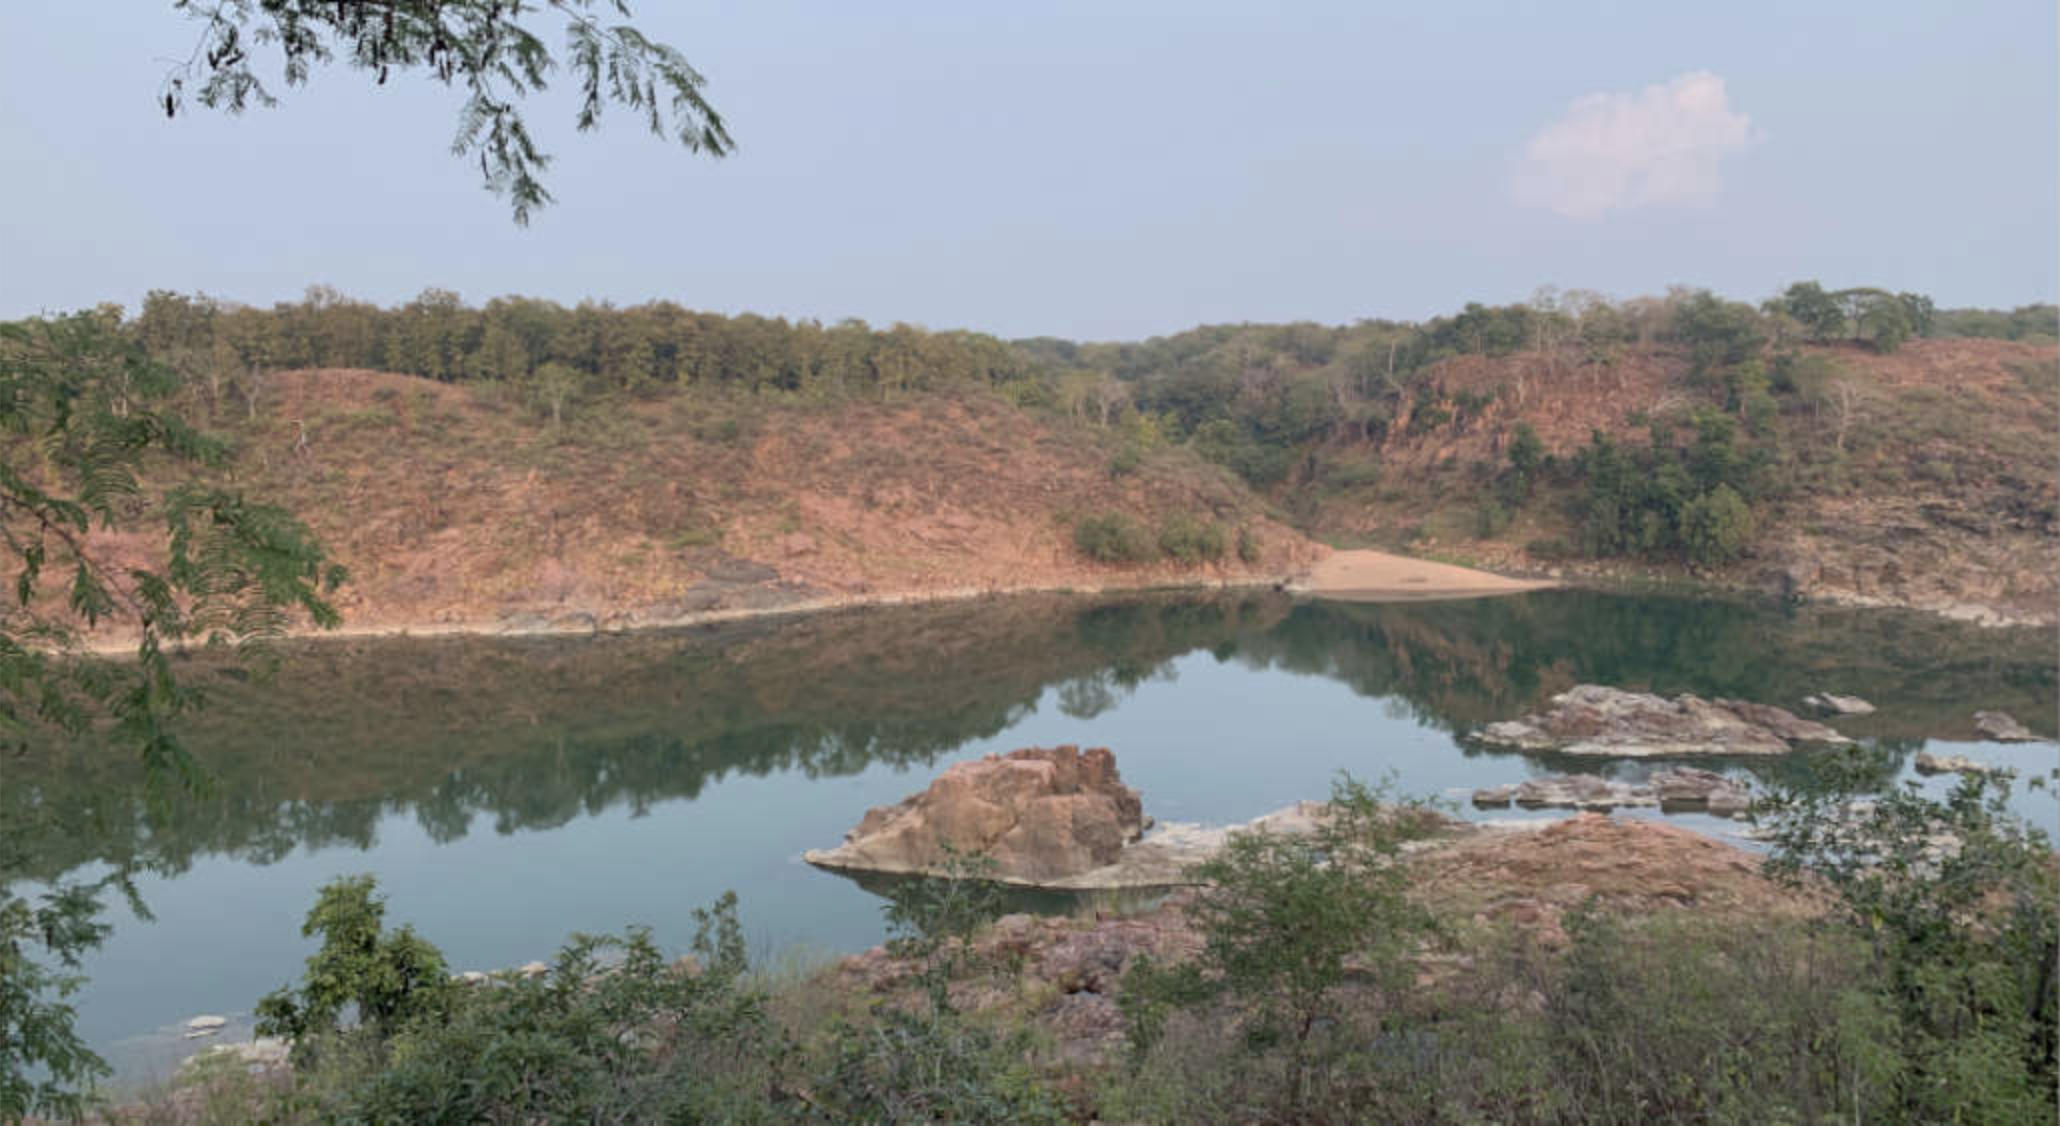 Pipe Dreams: Why Interlinking Ken-Betwa Will Not Solve Bundelkhand's Water Crisis - Pulitzer Center on Crisis Reporting